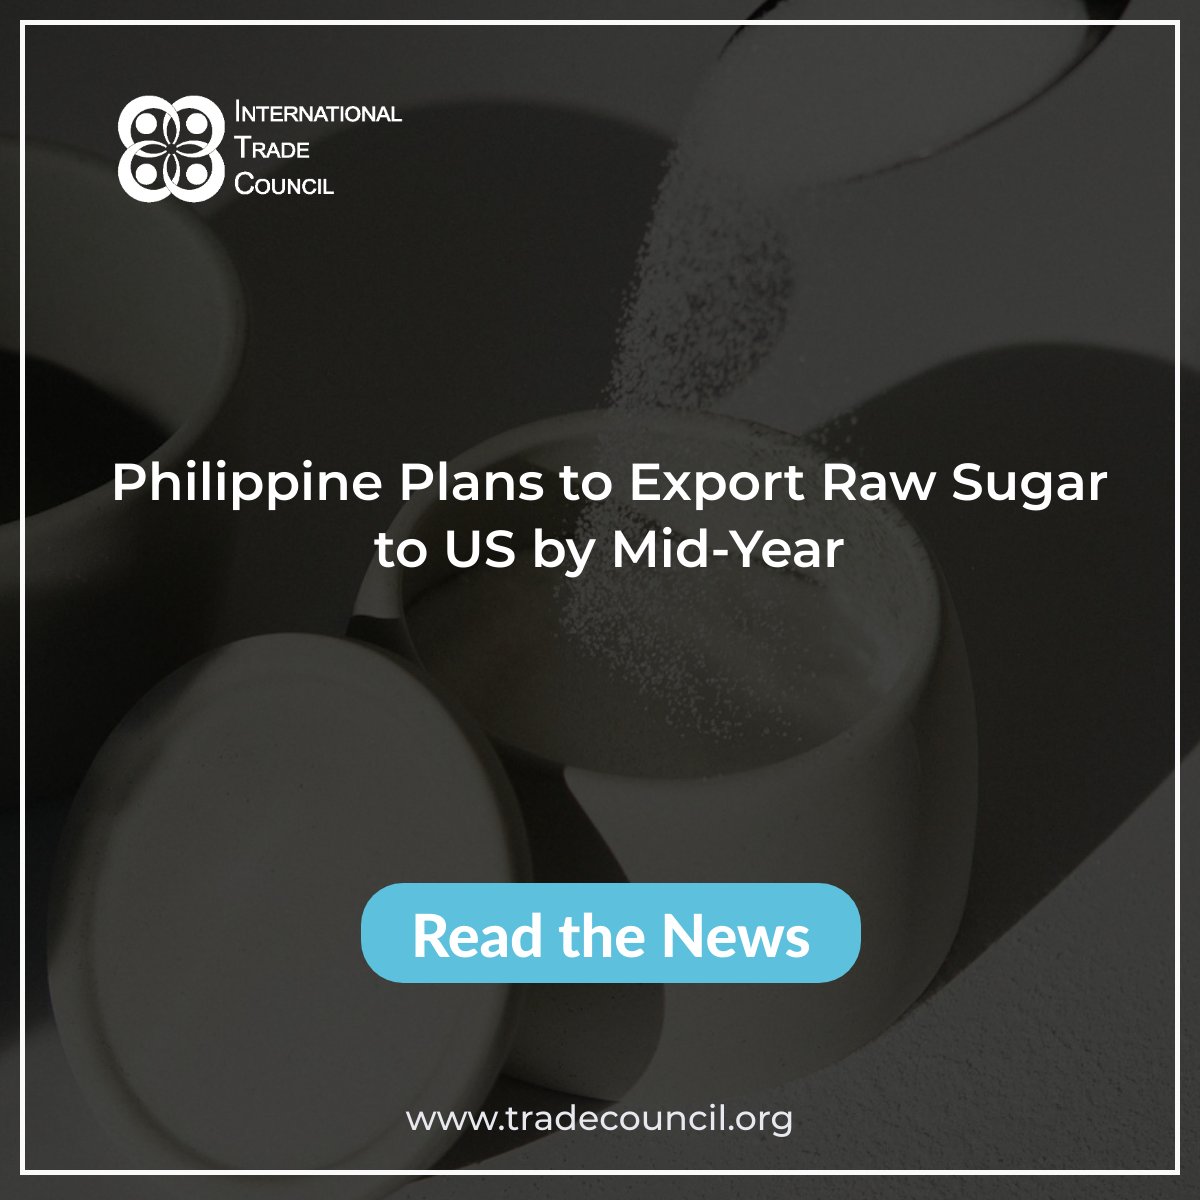 Philippine Plans to Export Raw Sugar to US by Mid-Year
Read The News: tradecouncil.org/philippine-pla…
#ITCNewsUpdates #BreakingNews #InternationalTrade #SugarExports #Philippines #USMarket #EconomicNews #NewsUpdate